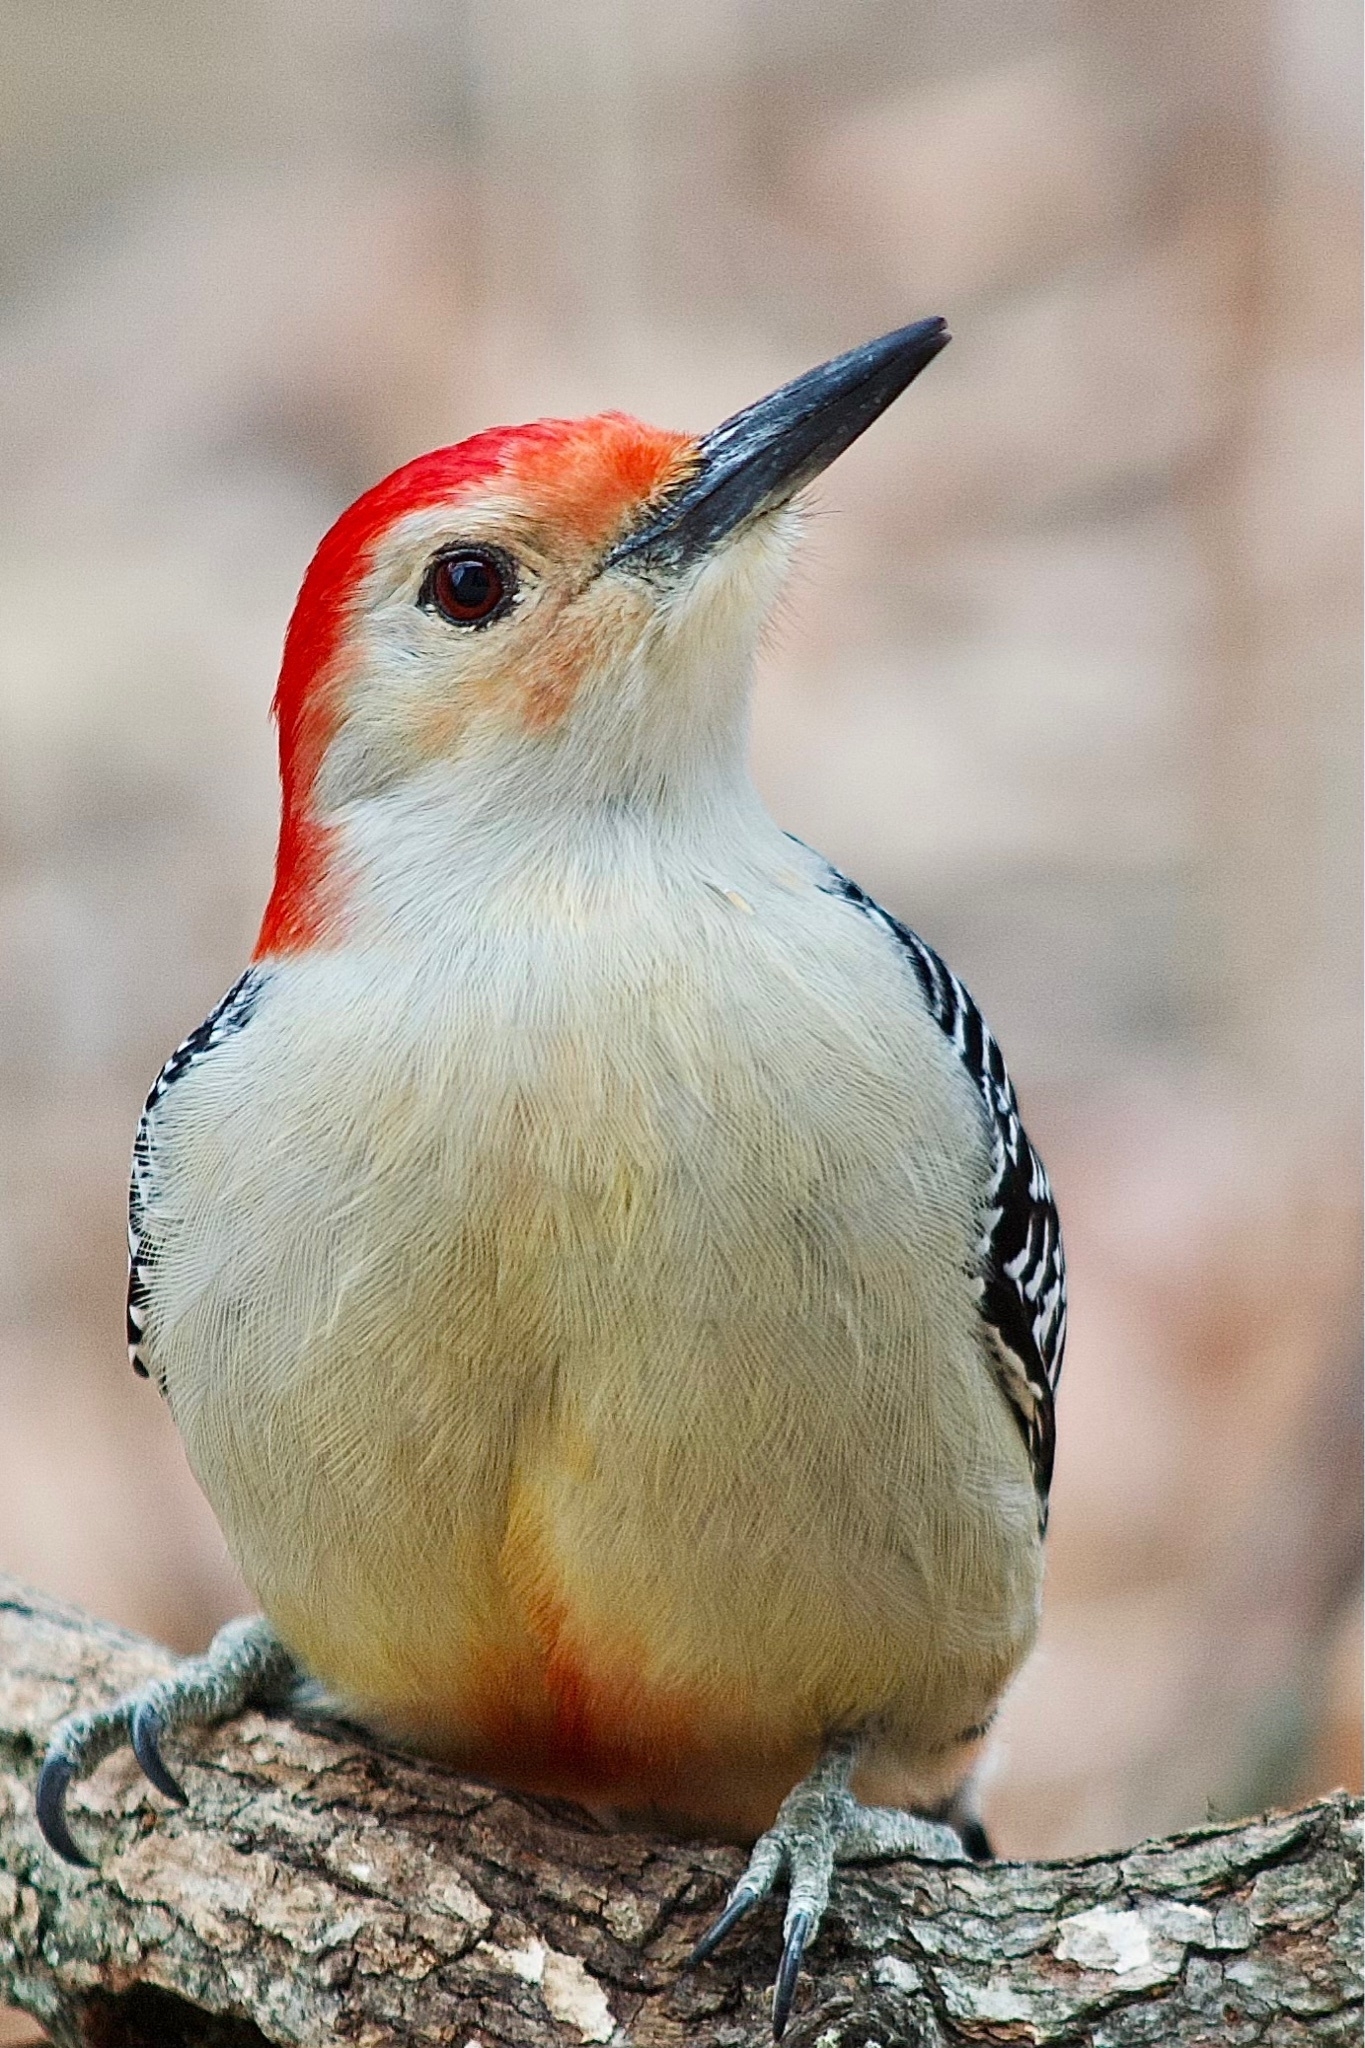 A woodpecker is perched on a tree set against a blurred background. The underside of the bird is predominantly off-white, and the center of his head is red beginning at the beak and stretching to the back. 